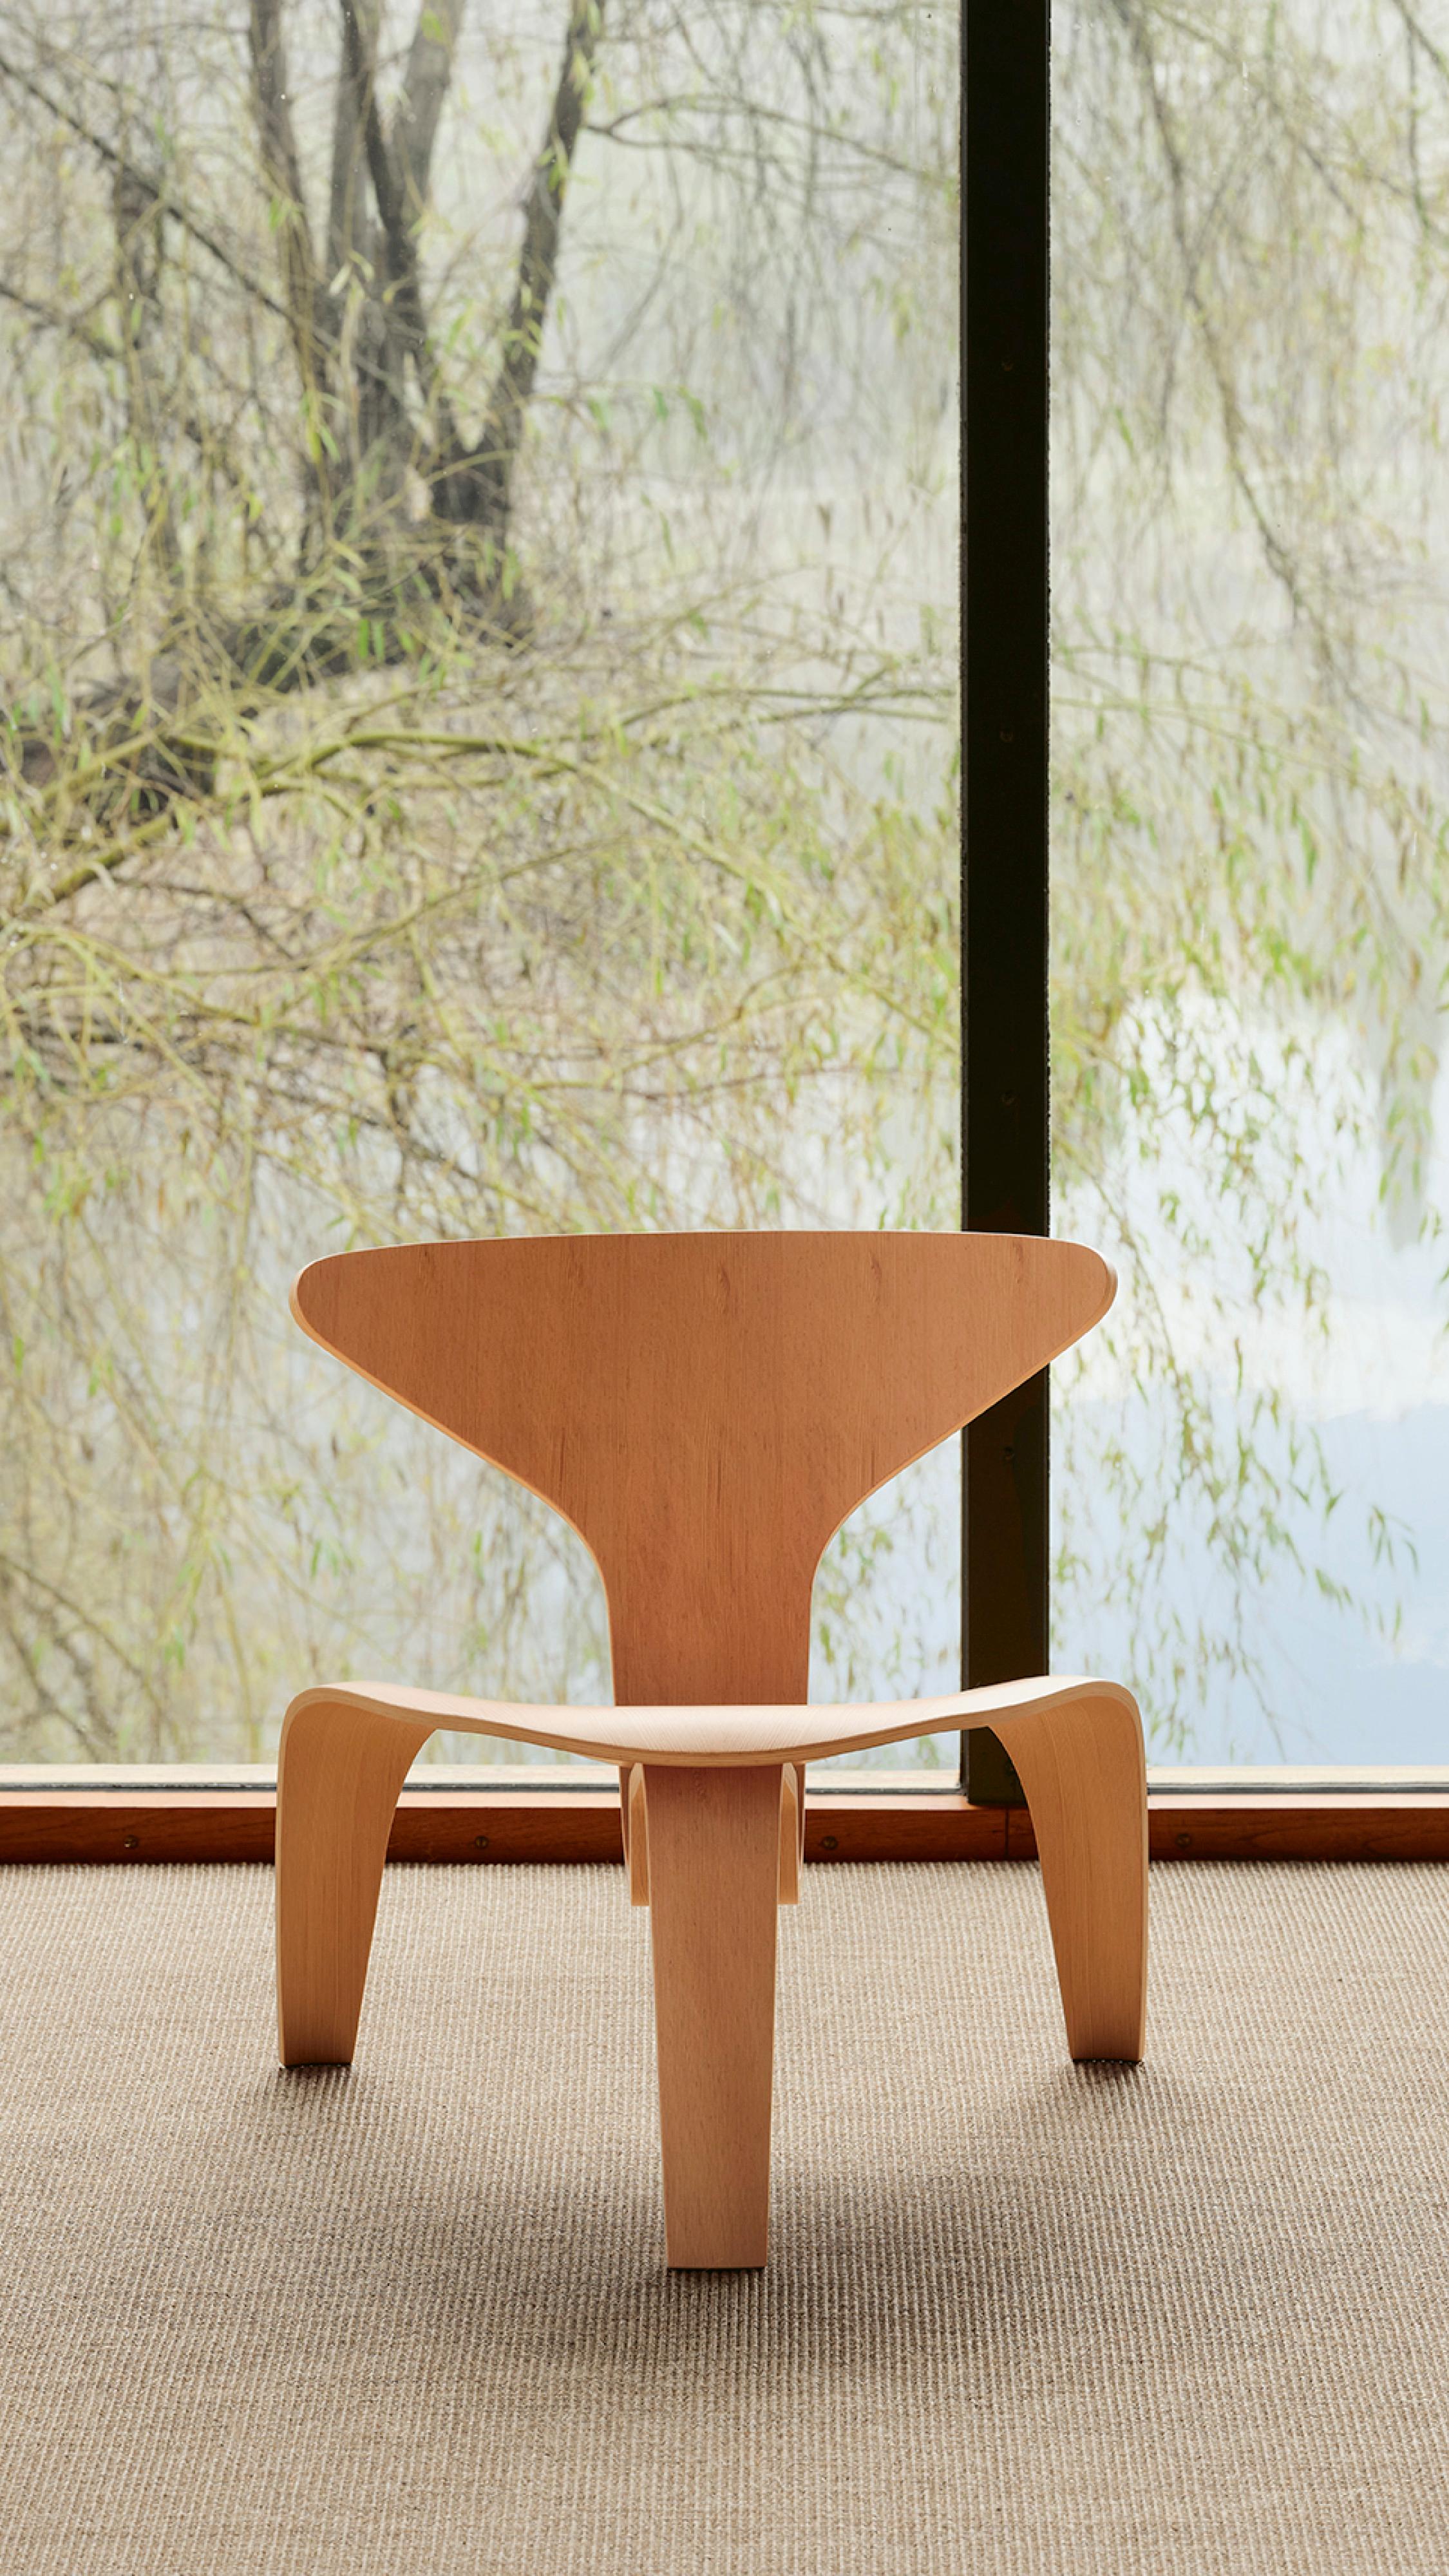 Poul Kjærholm 'PK0 A' Chair for Fritz Hansen in Oregon Pine In New Condition For Sale In Glendale, CA